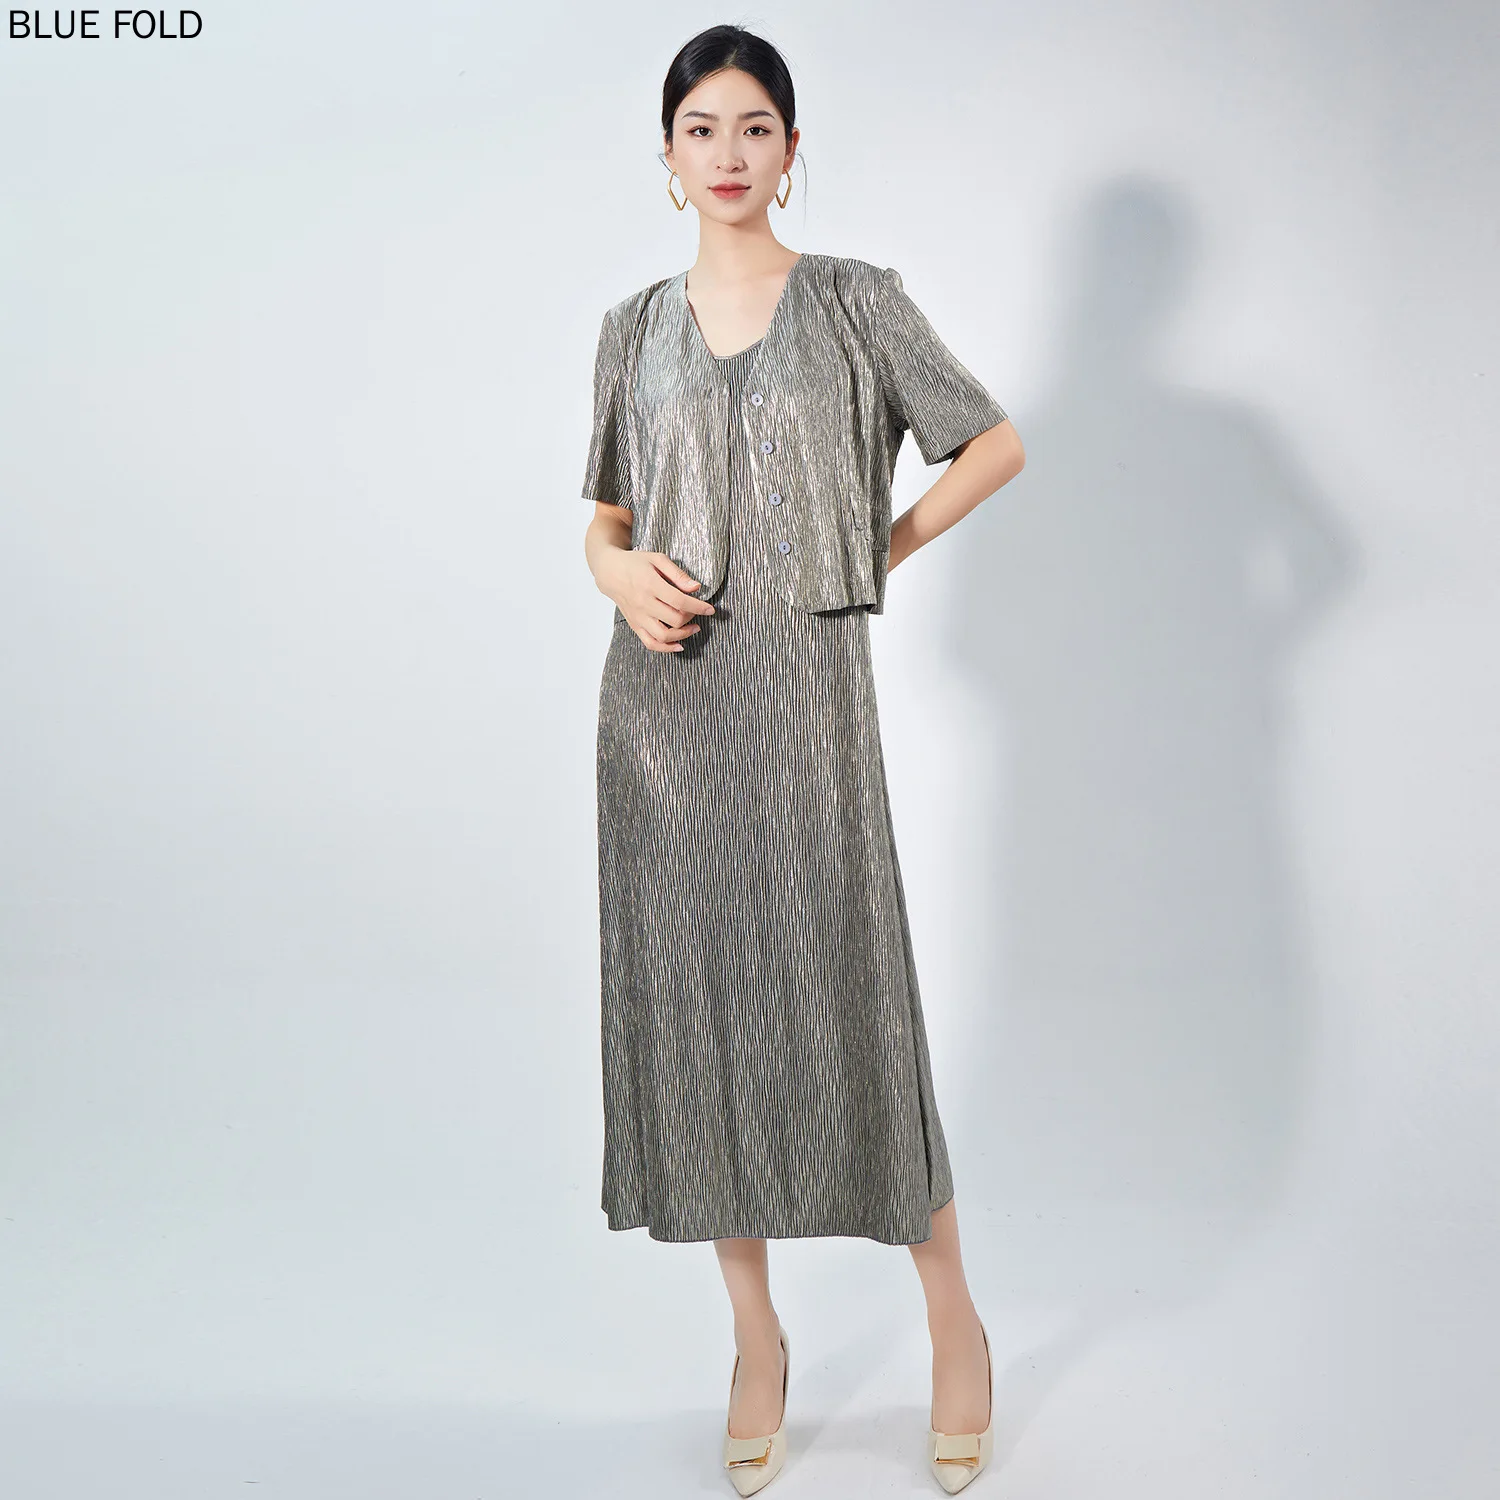 

Women's Spring Women's Suit MIYAKE Spring and Summer New Metal Series Hot Style Lazy Style Pleated Suspender Dress Two-piece Set